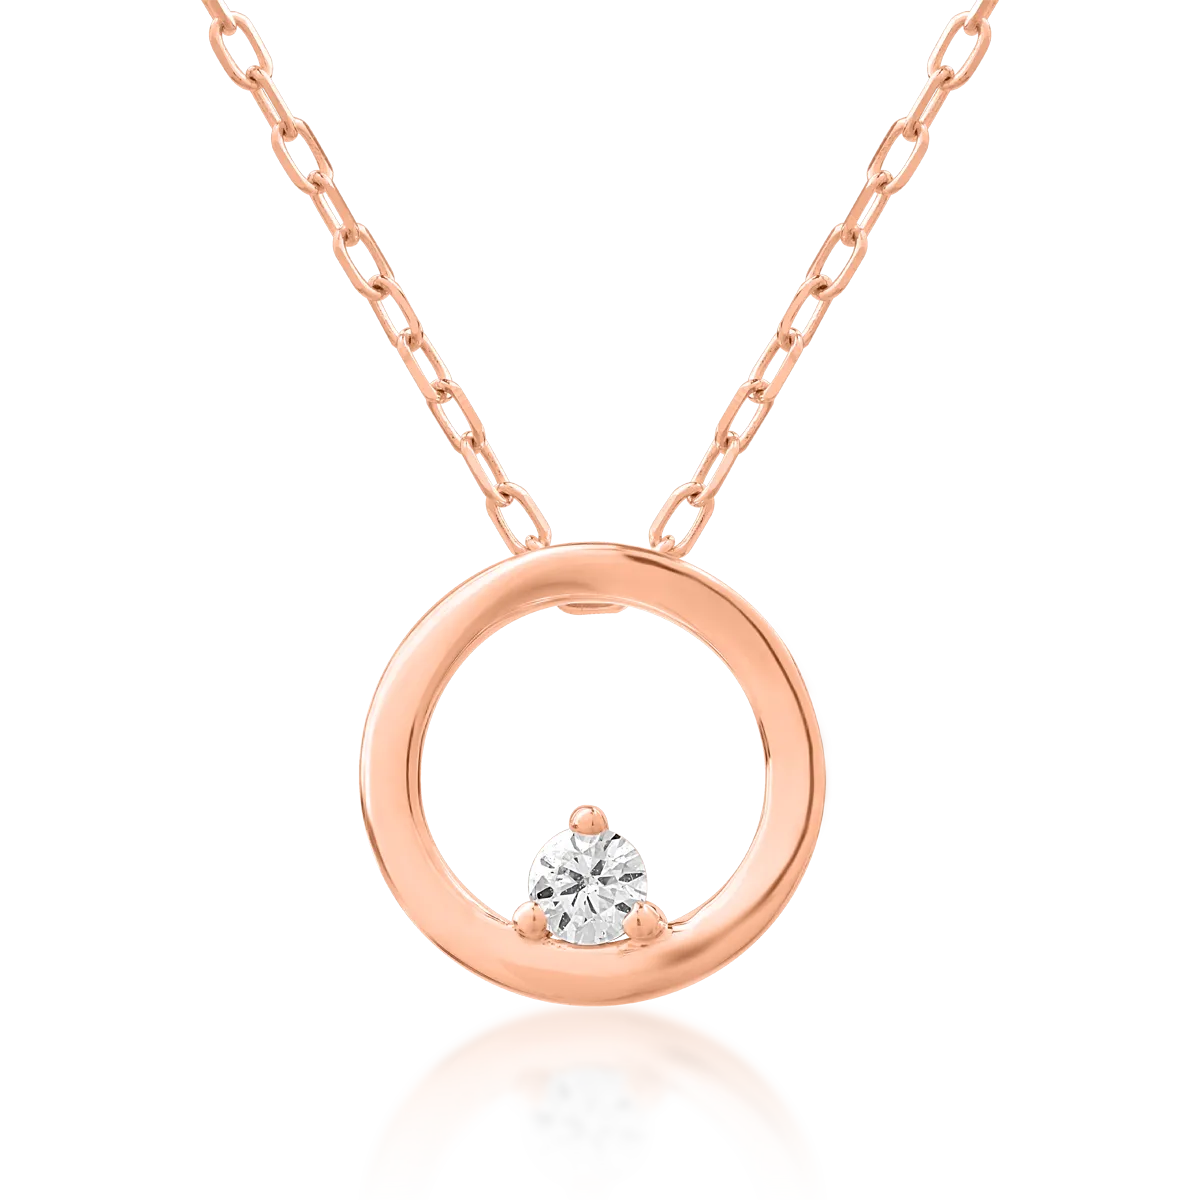 18K rose gold pendant necklace with 0.035ct diamond